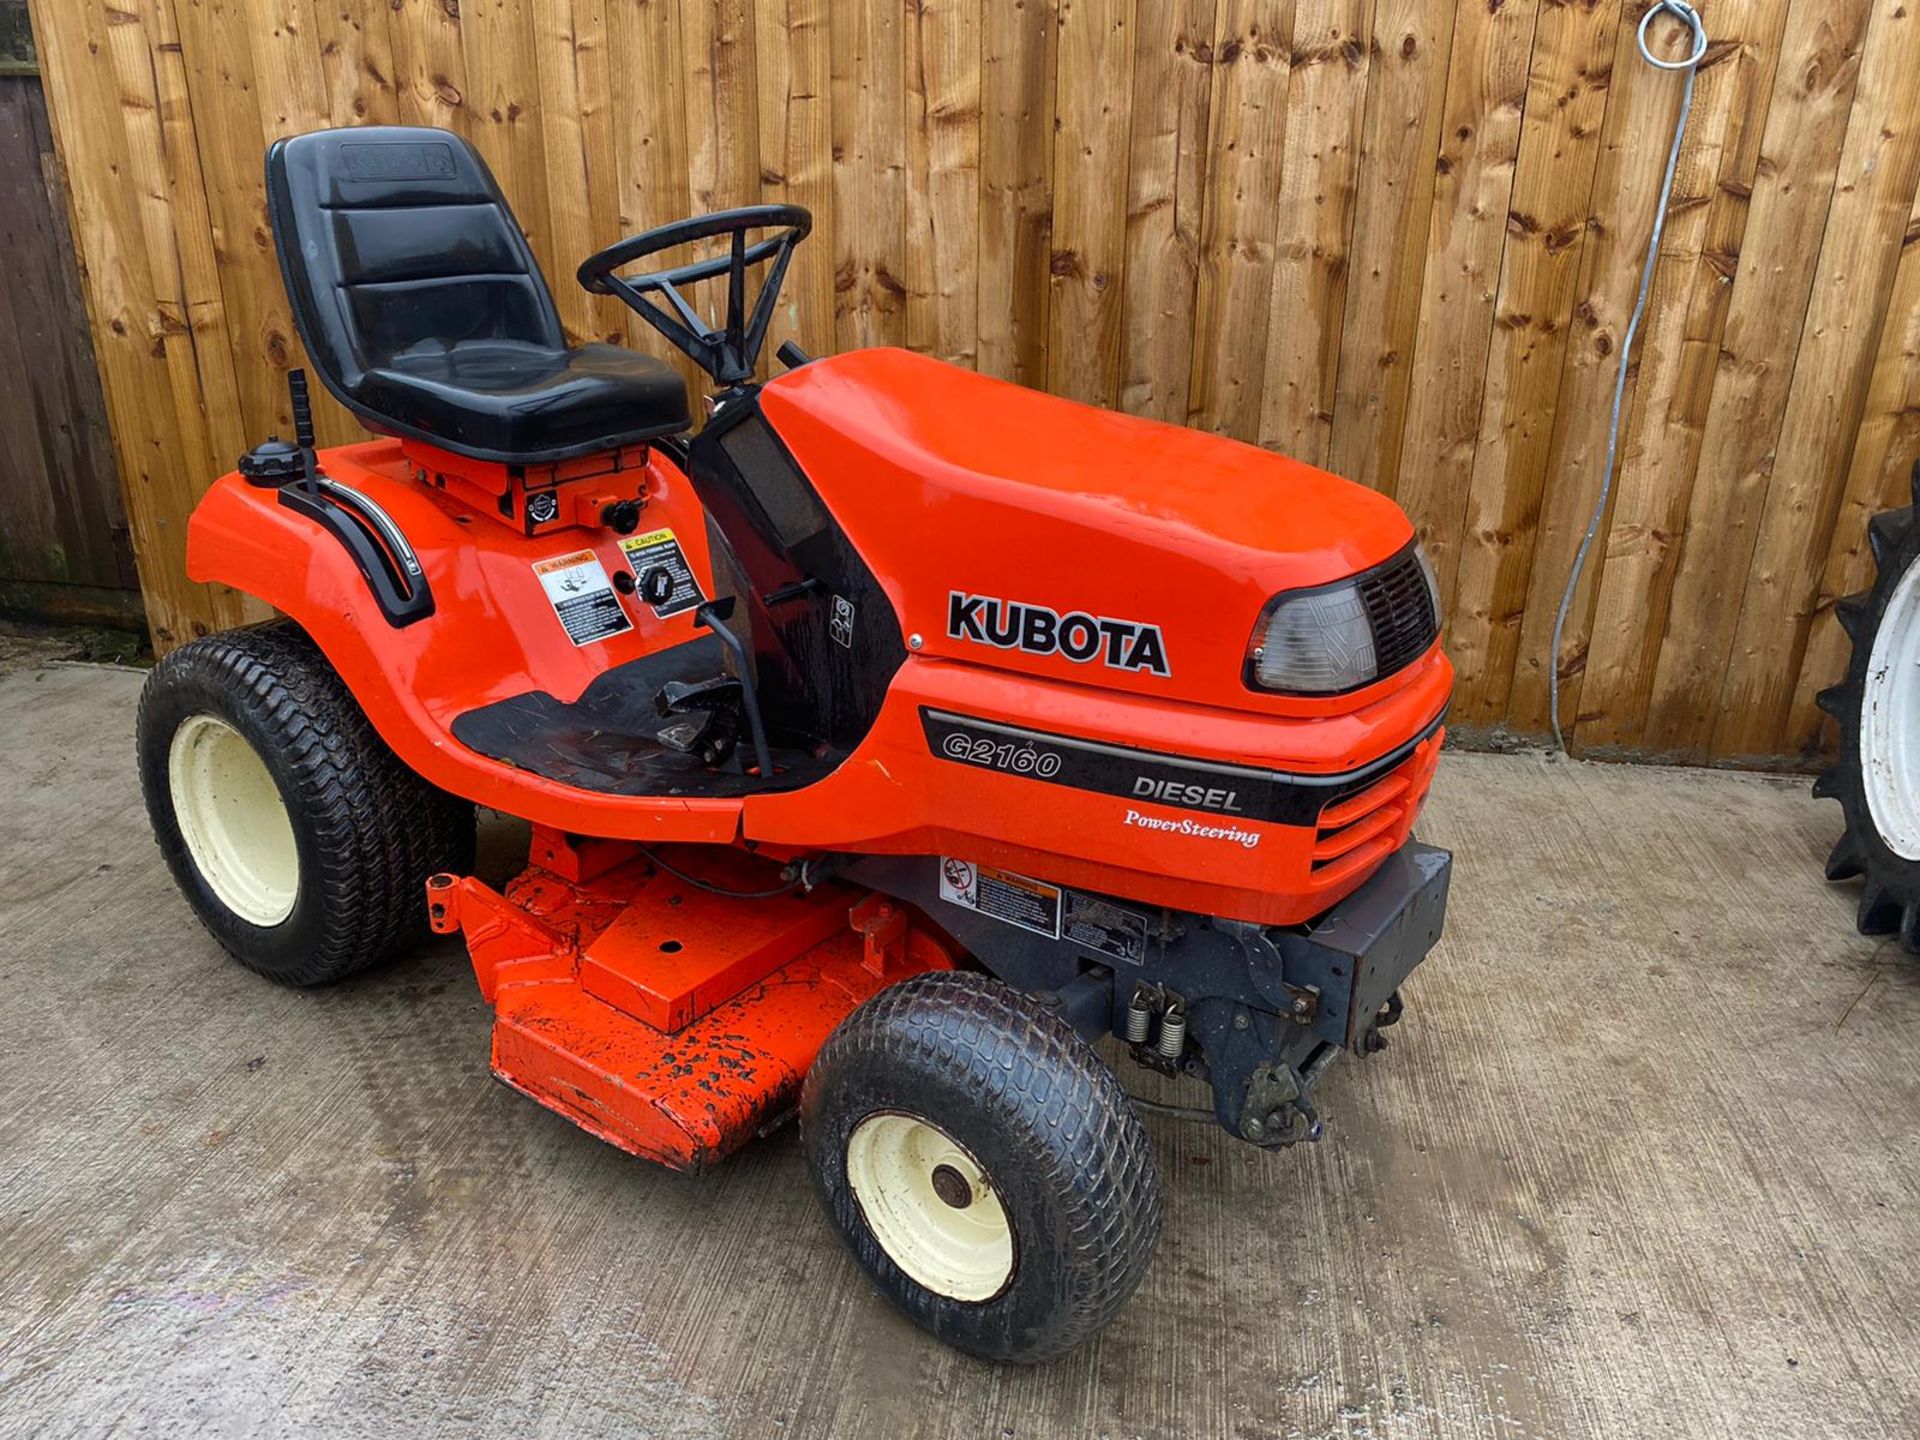 2009 KUBOTA G2160 DIESEL RIDE ON MOWER, IN EXCELLENT CONDITION, 1 OWNER FROM NEW *PLUS VAT* - Image 7 of 8